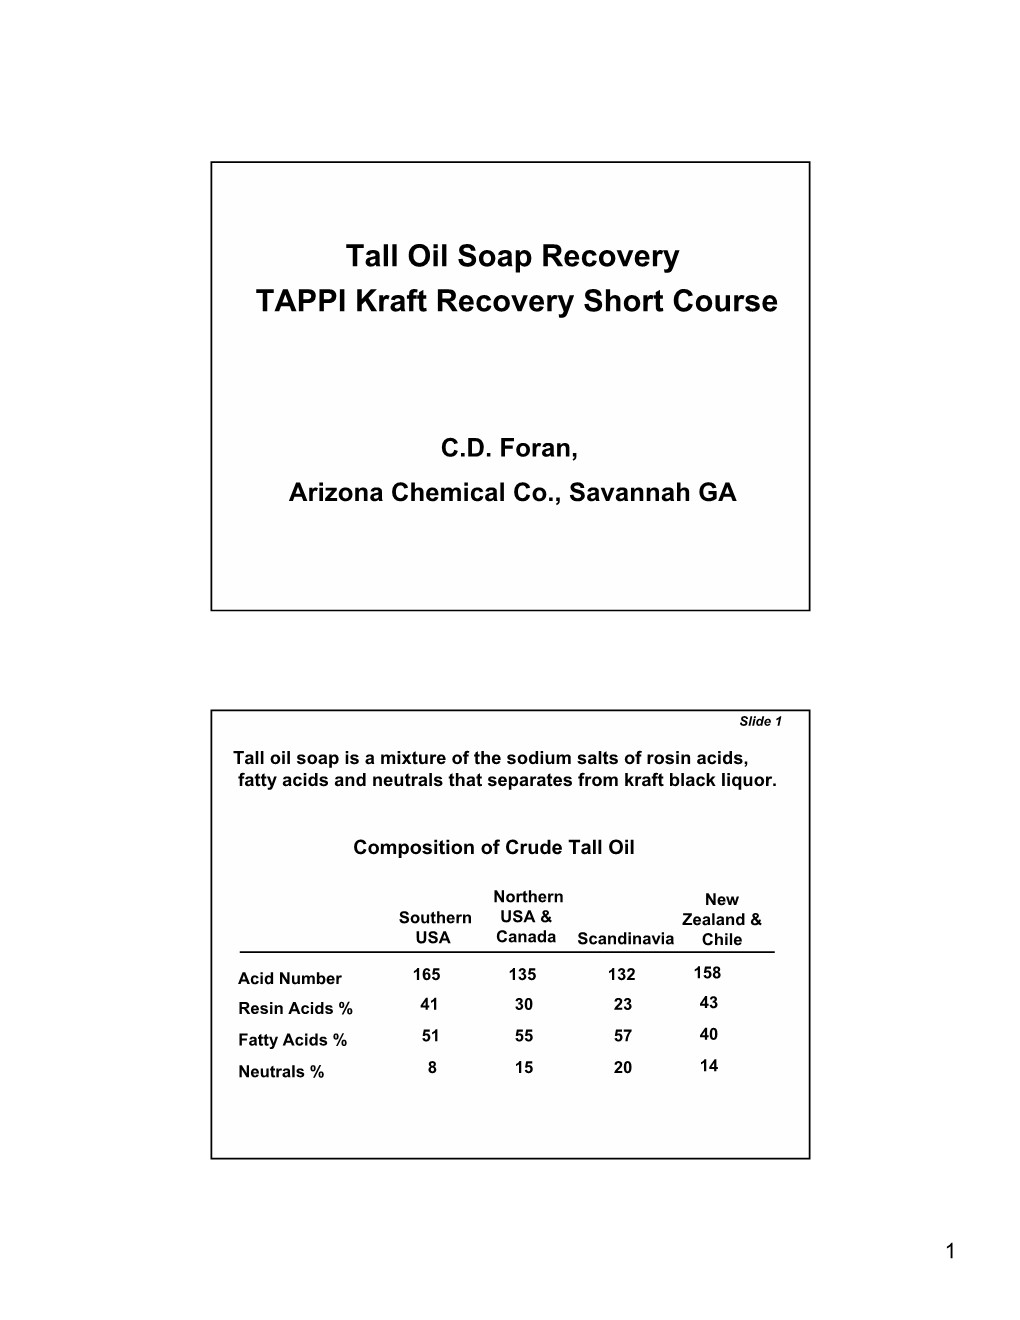 Tall Oil Soap Recovery TAPPI Kraft Recovery Short Course